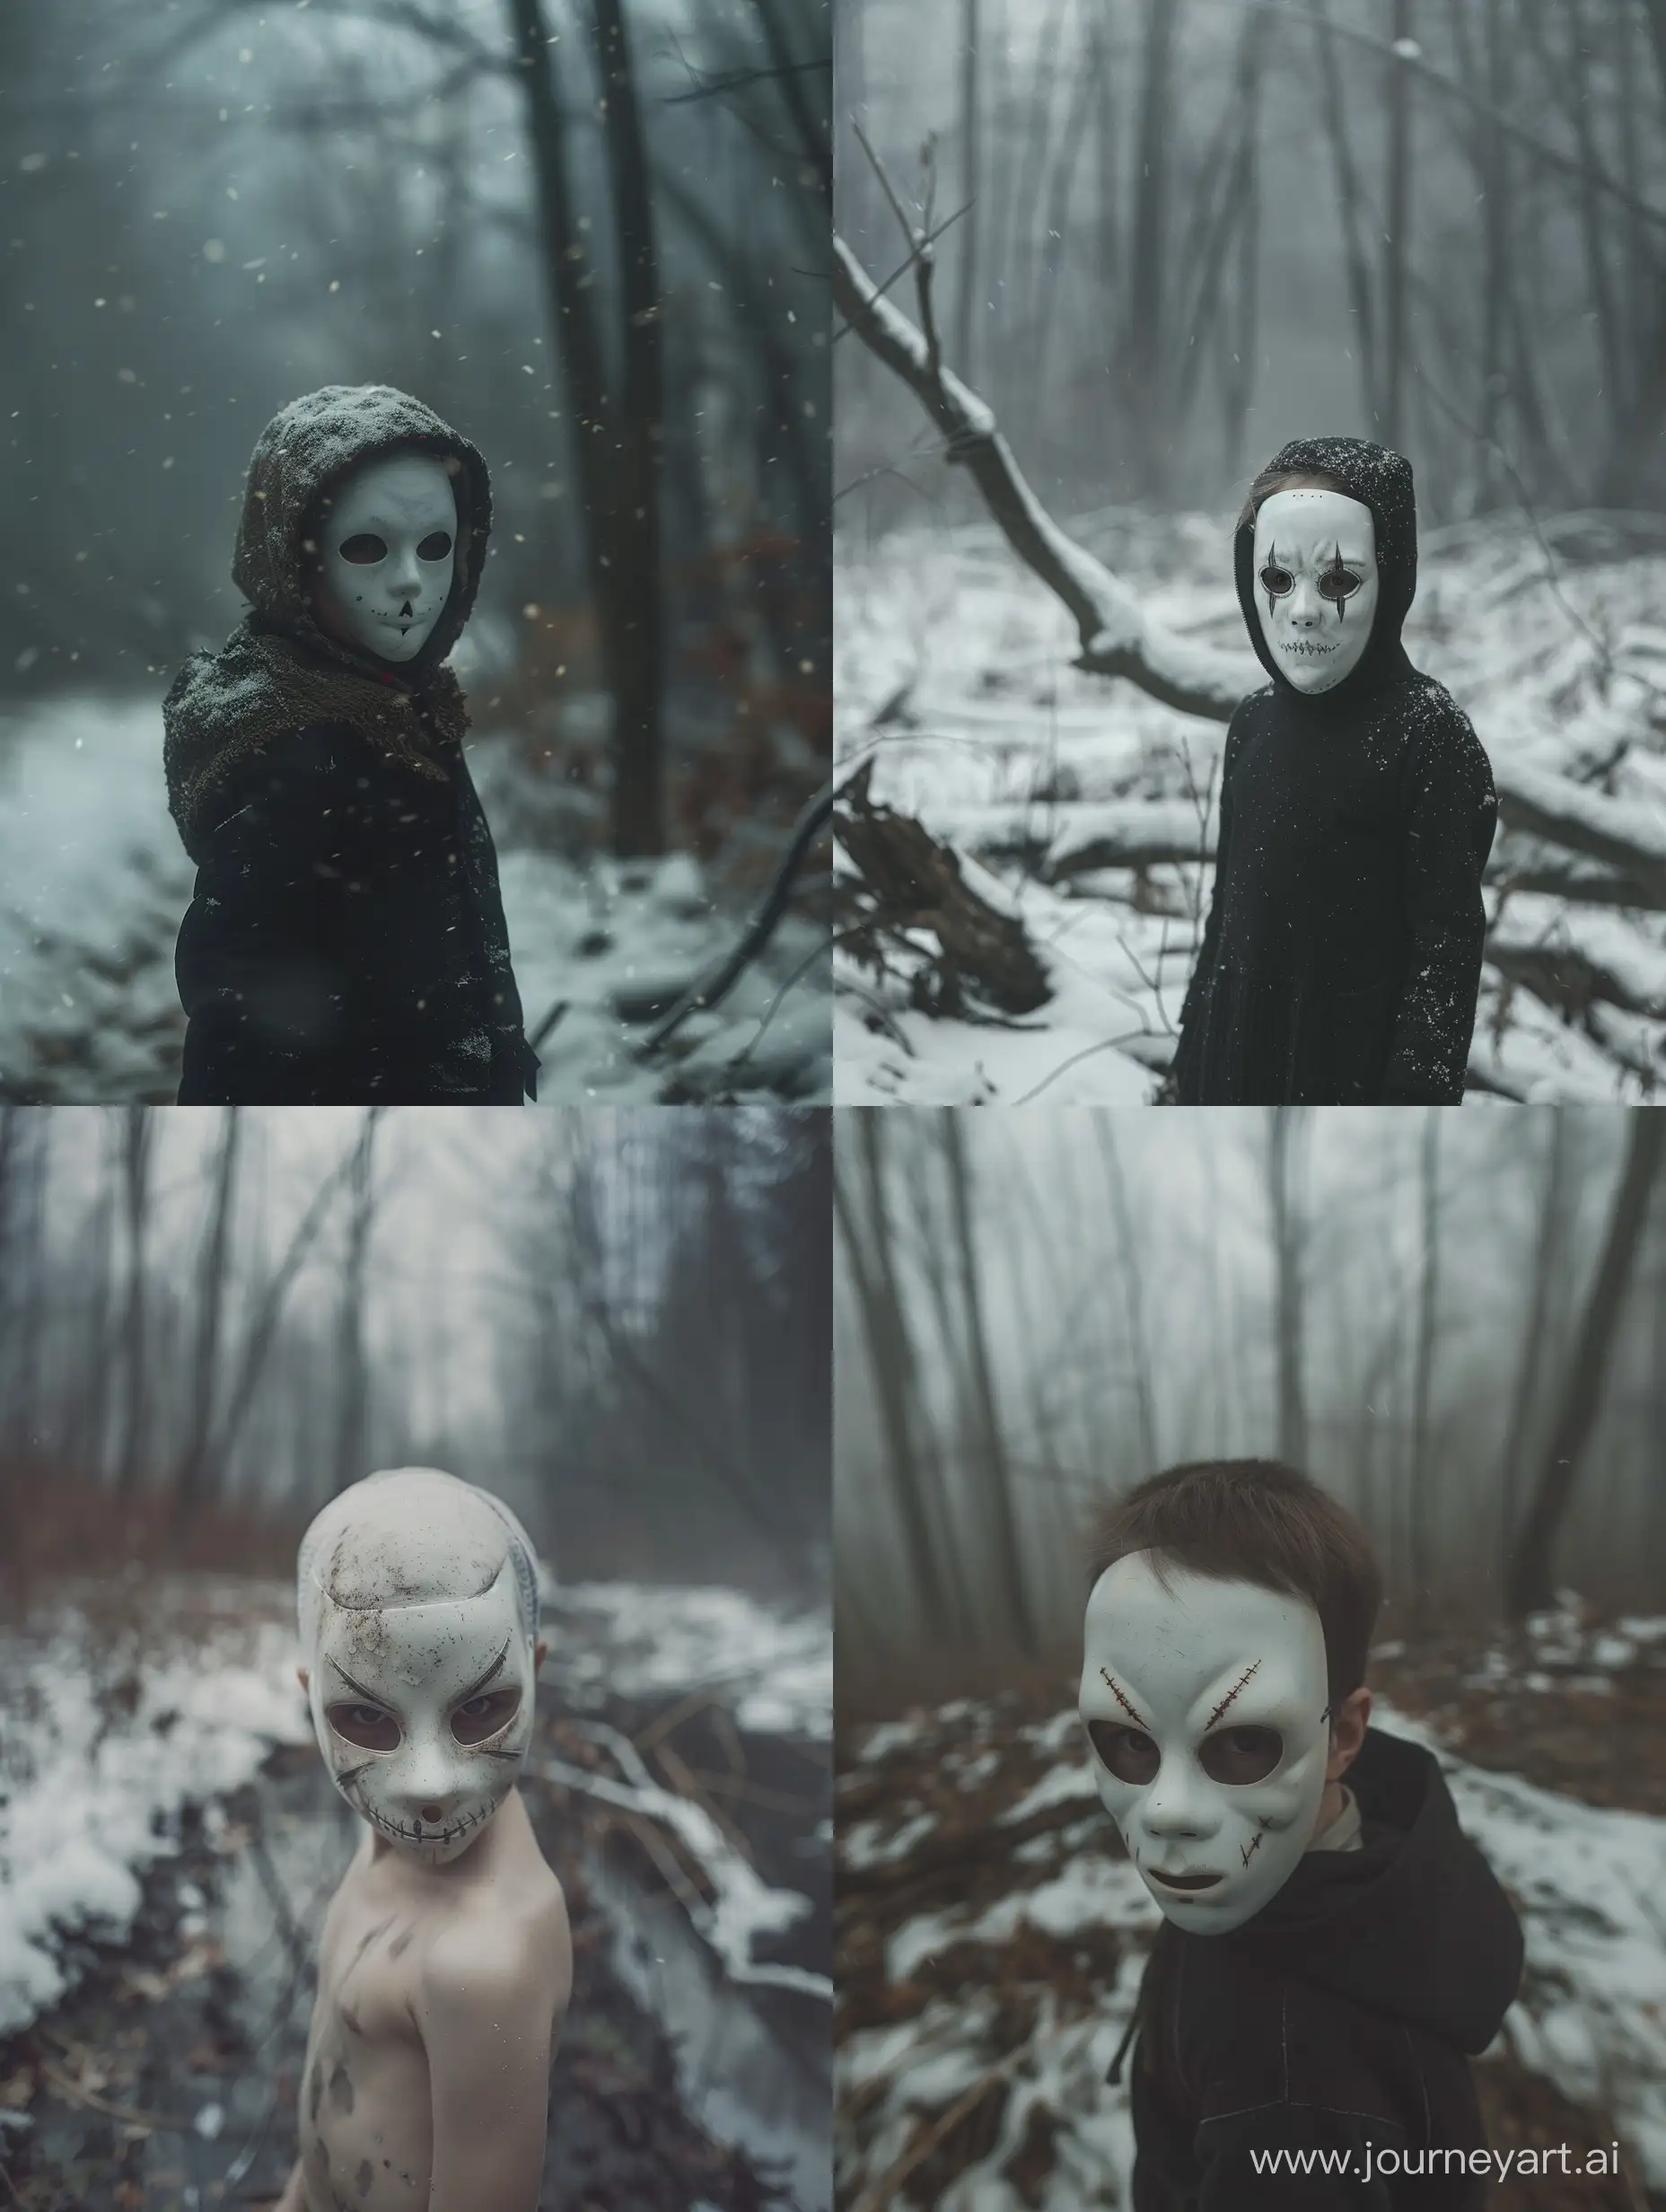 Creepy-Child-in-White-Mask-Stares-Into-Camera-in-Dark-Snowy-Forest